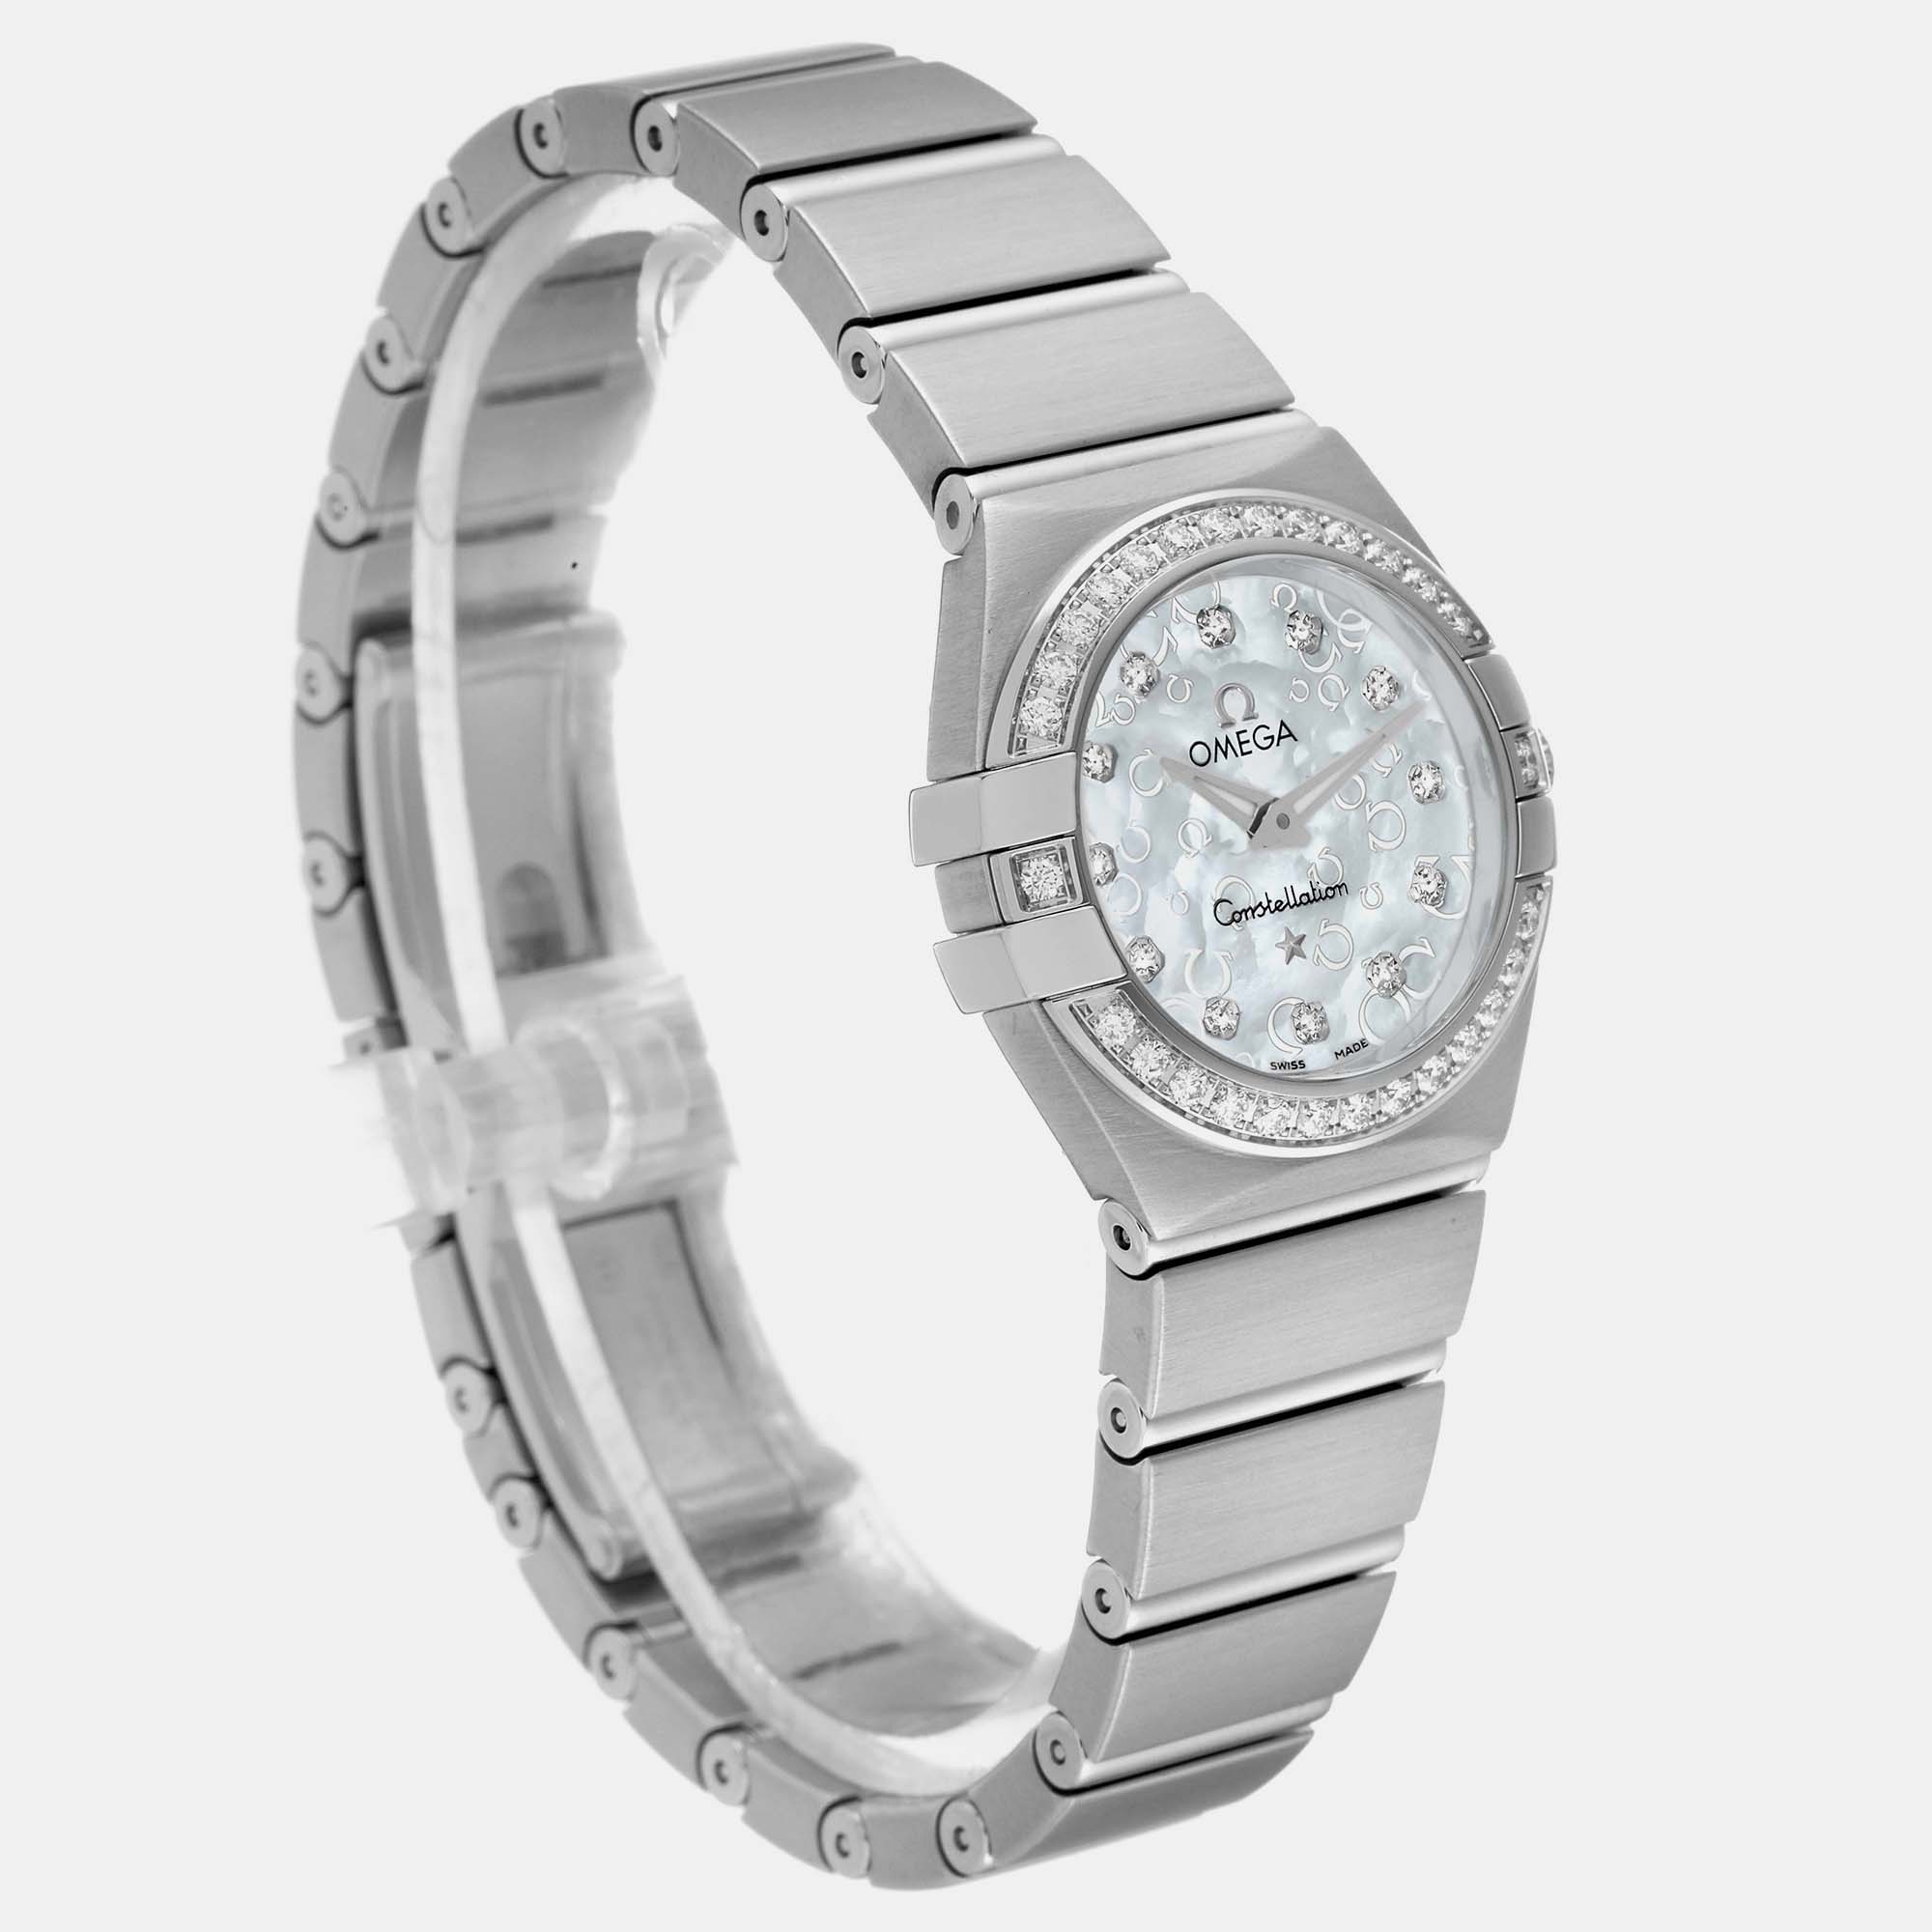 Omega Mother Of Pearl Diamond Stainless Steel Constellation 123.15.24.60.52.001 Quartz Women's Wristwatch 24 Mm